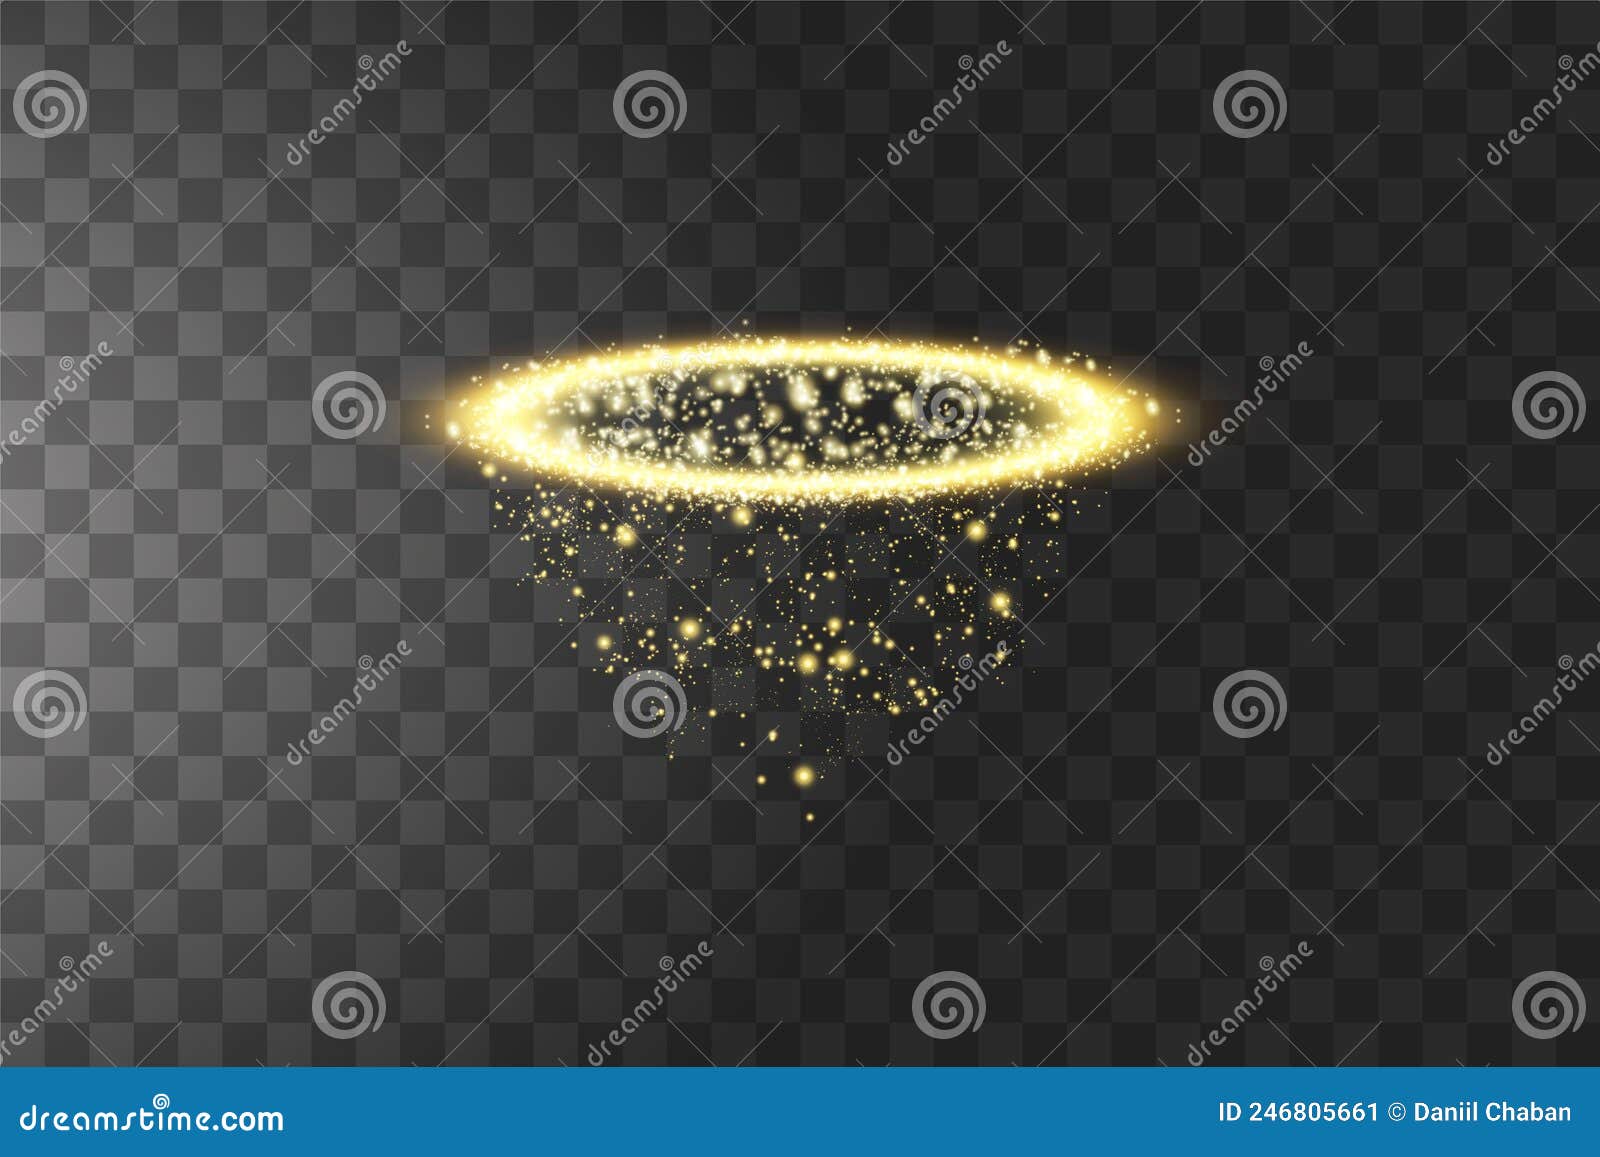 Golden halo angel ring Isolated on black background, vector illustration -  stock vector 1921019 | Crushpixel